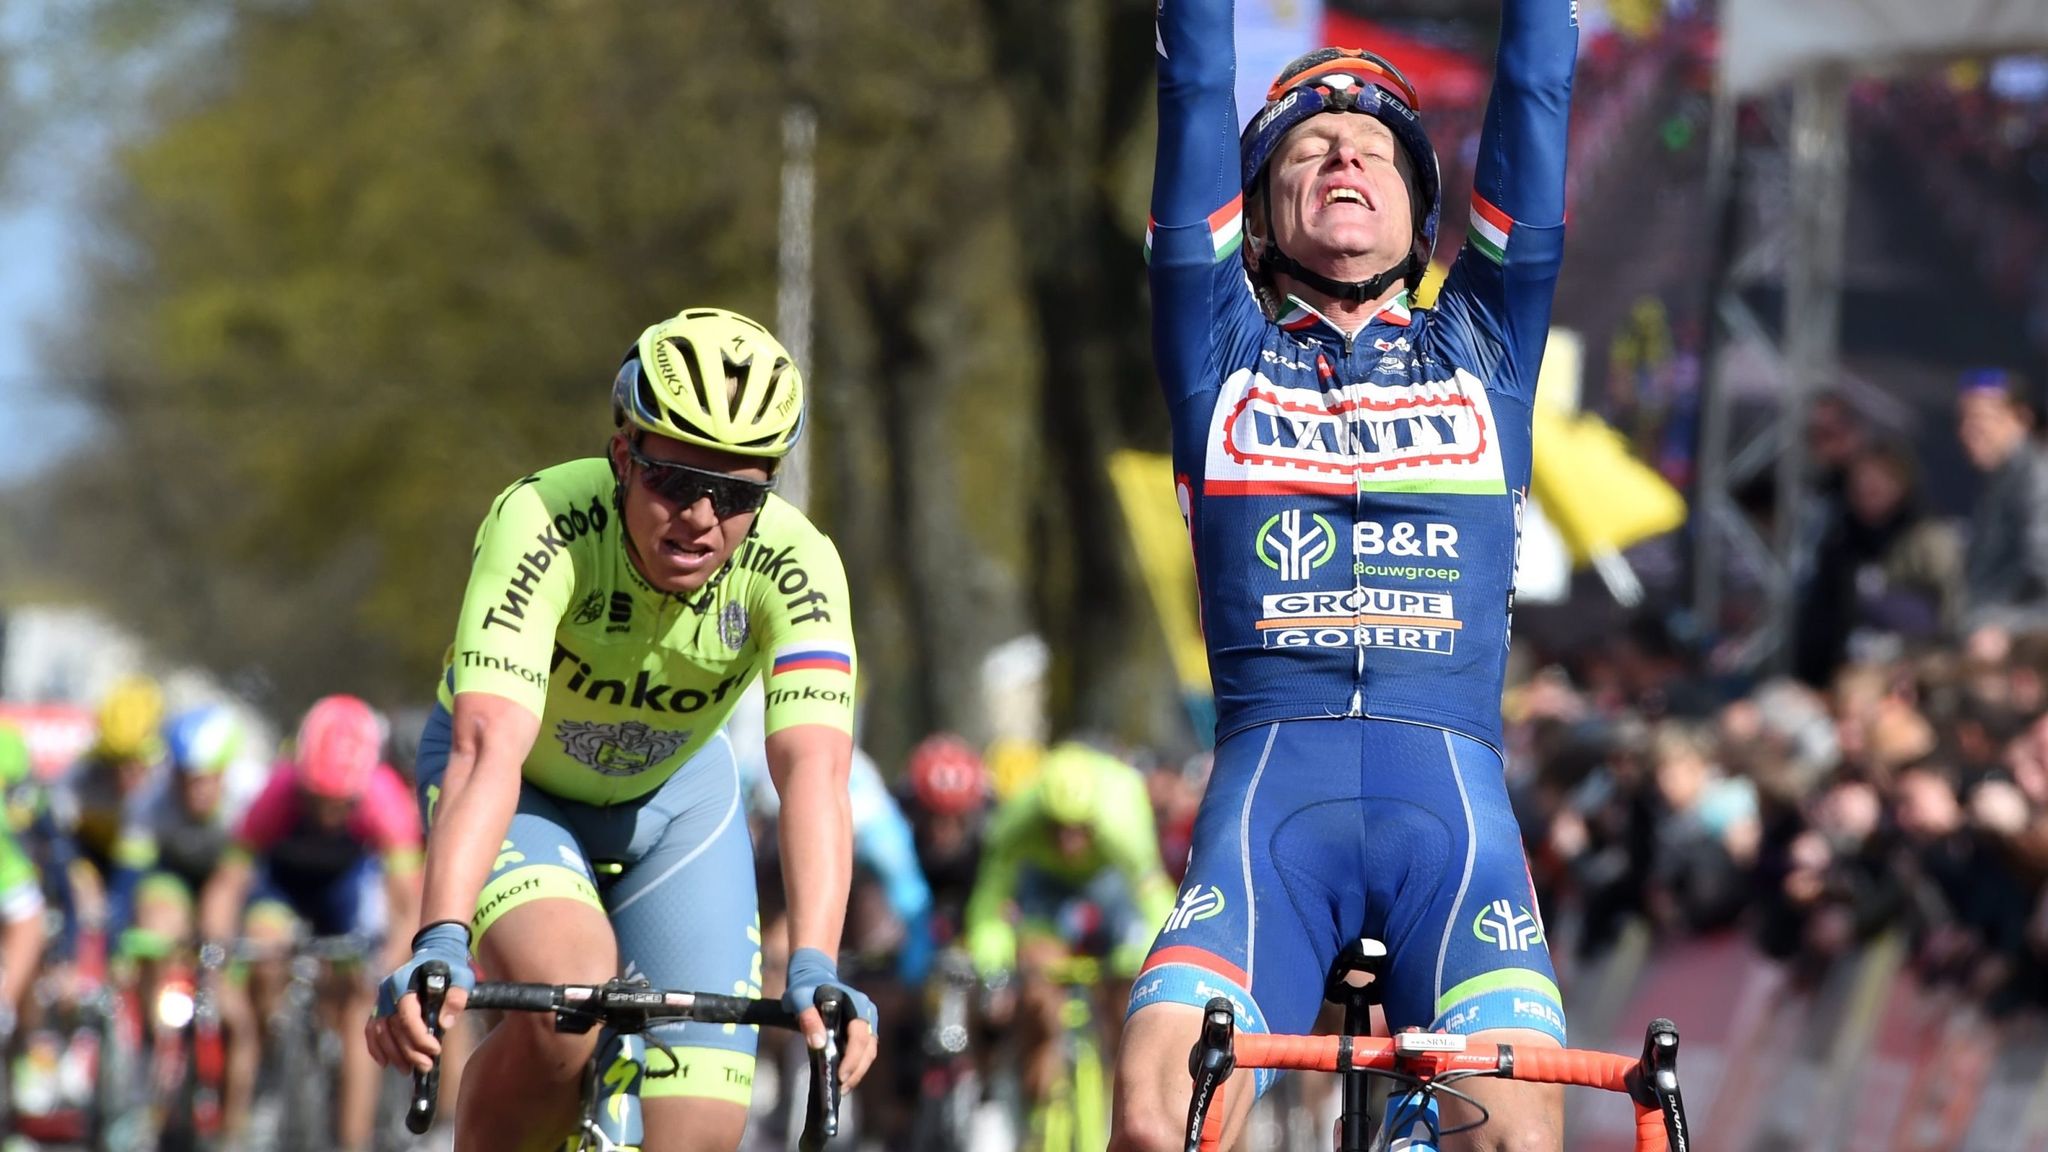 Betting amstel gold race results